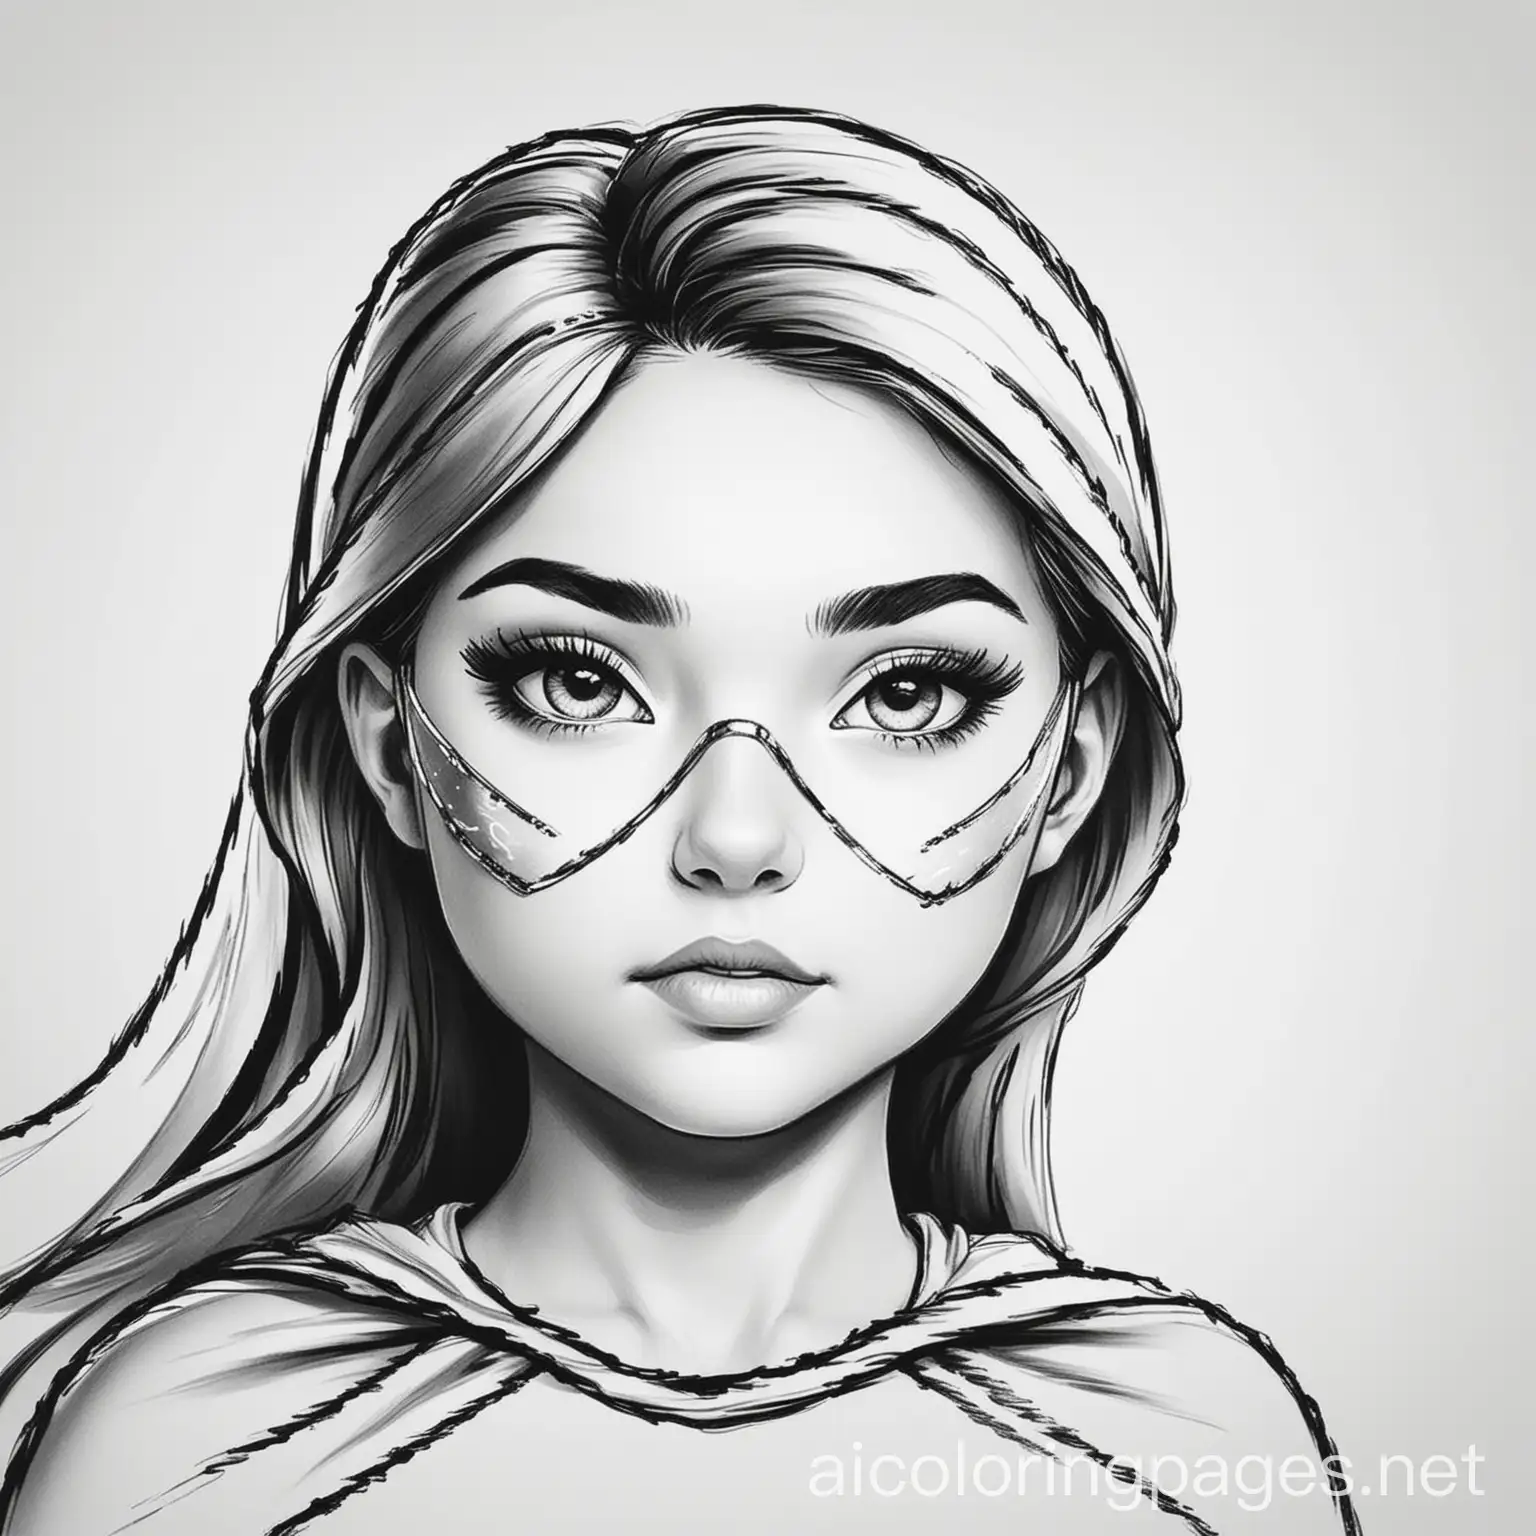 Superhero girl with mask and cape, Coloring Page, black and white, line art, white background, Simplicity, Ample White Space.